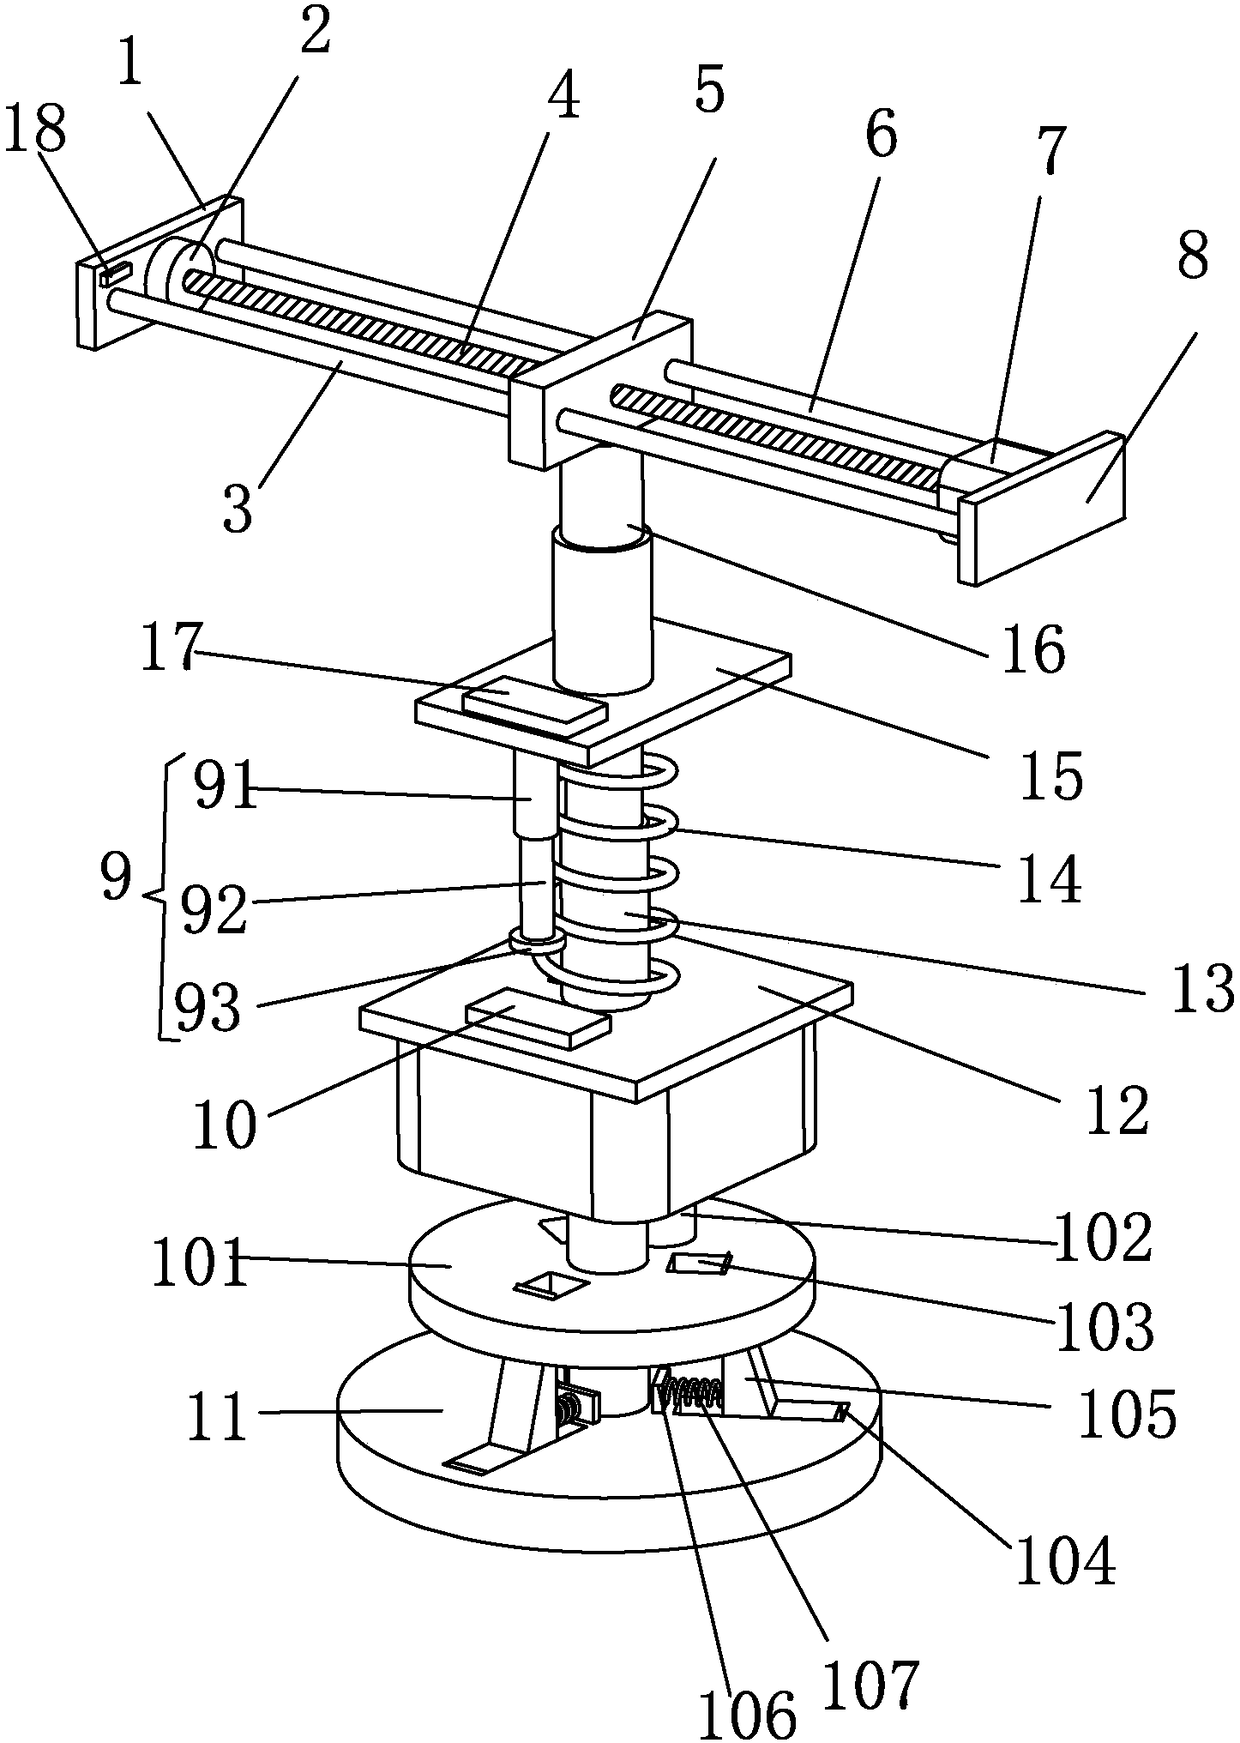 Cover pressing device